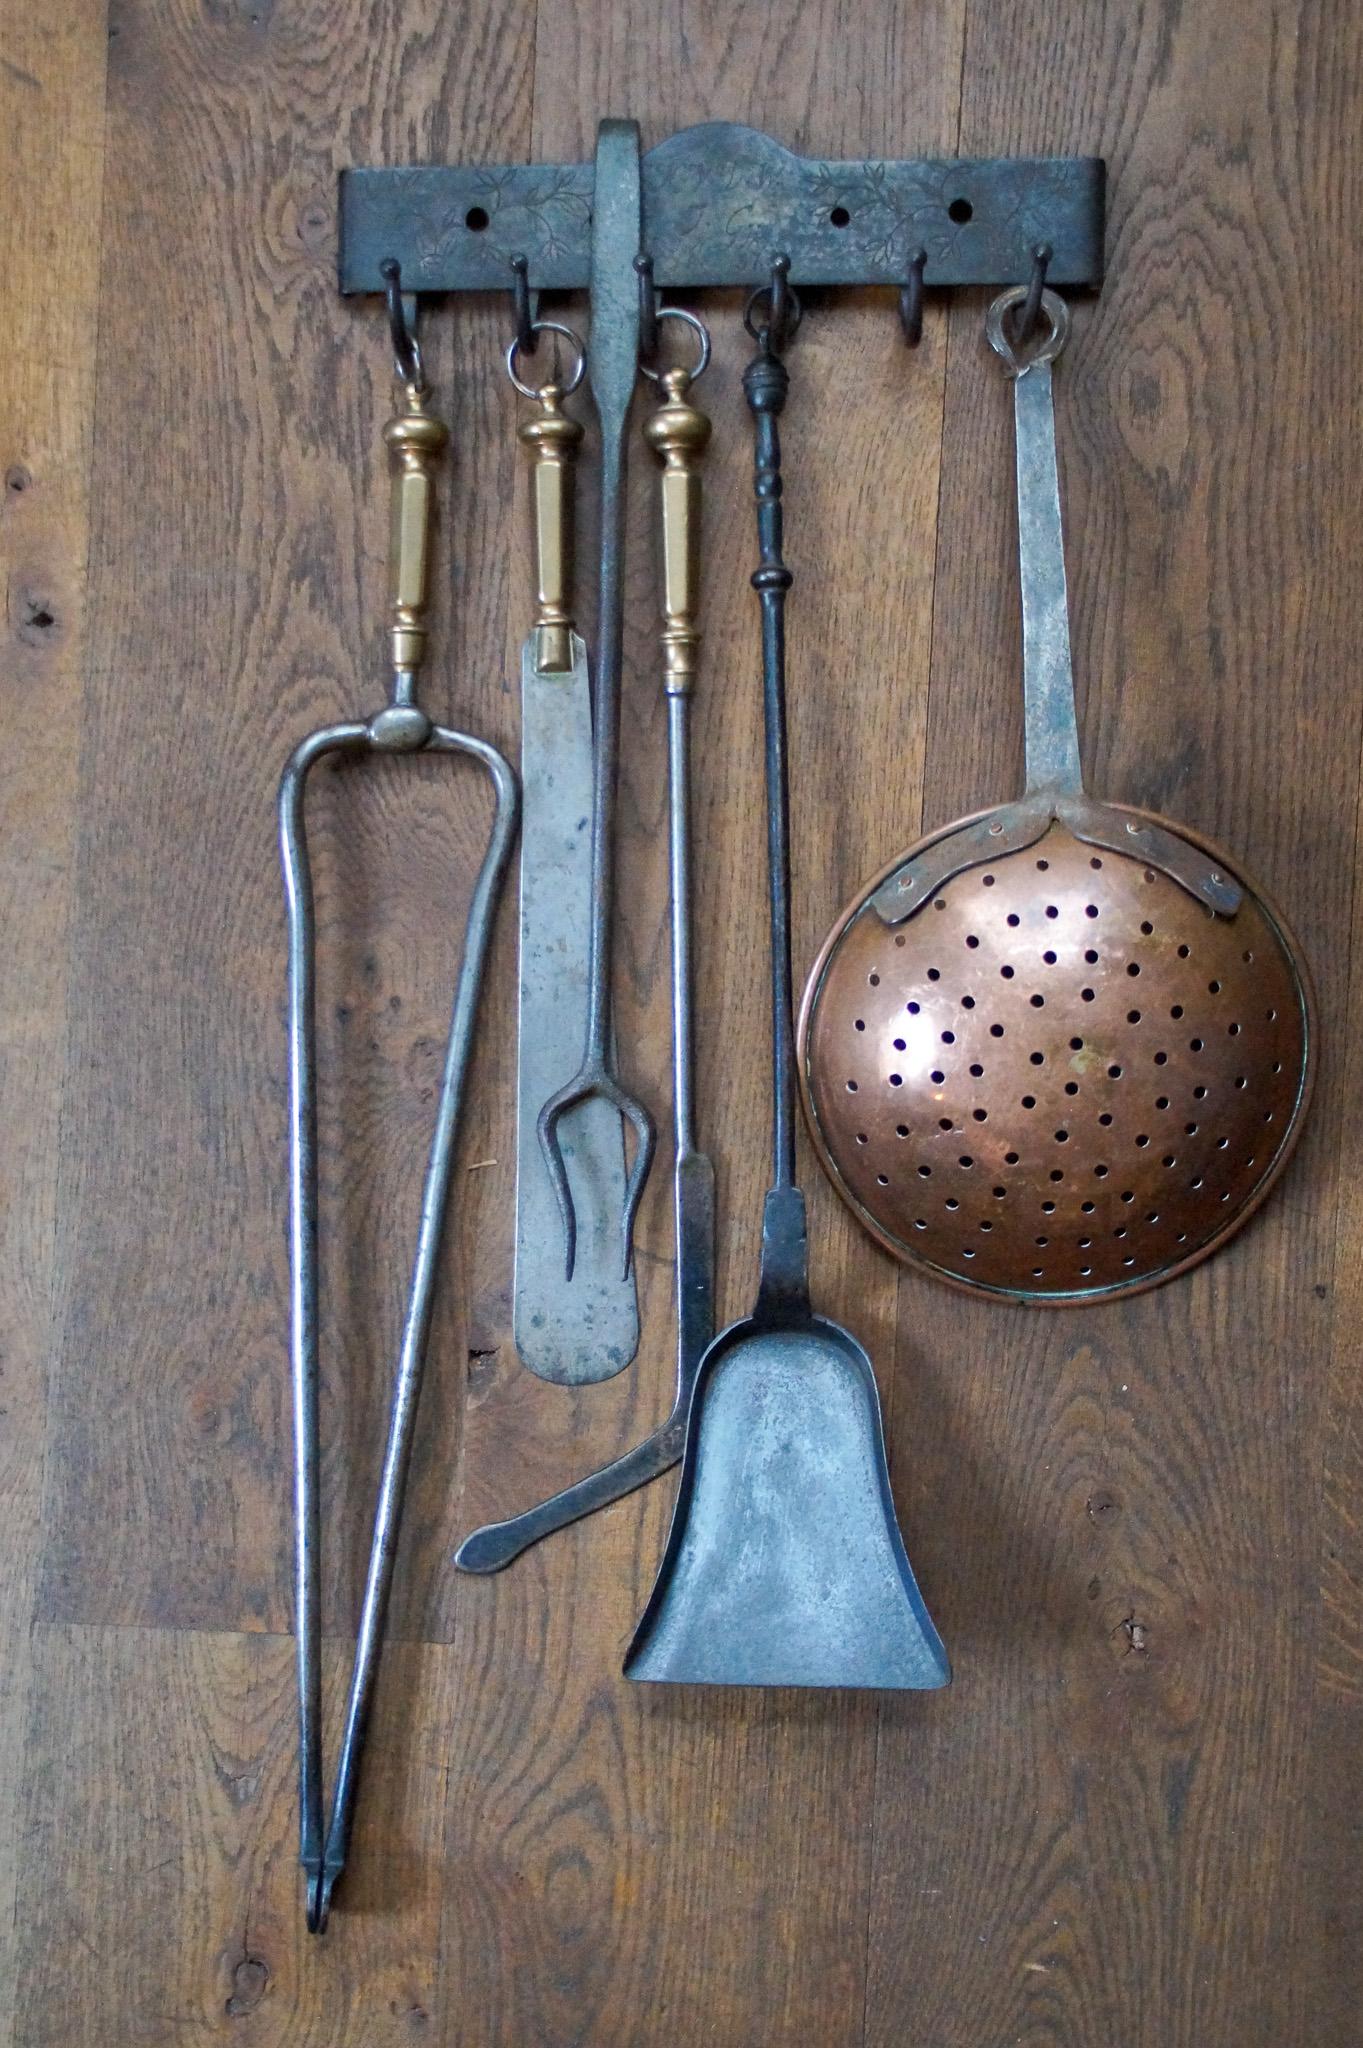 19th century Dutch victorian fireplace tool set consisting of a fireplace tongs, a tasting fork, a skimmer, a shovel, a spatula, a fire poke and a hanger. The set is made of wrought iron, three tools have a bronze handle and the skimmer is made of